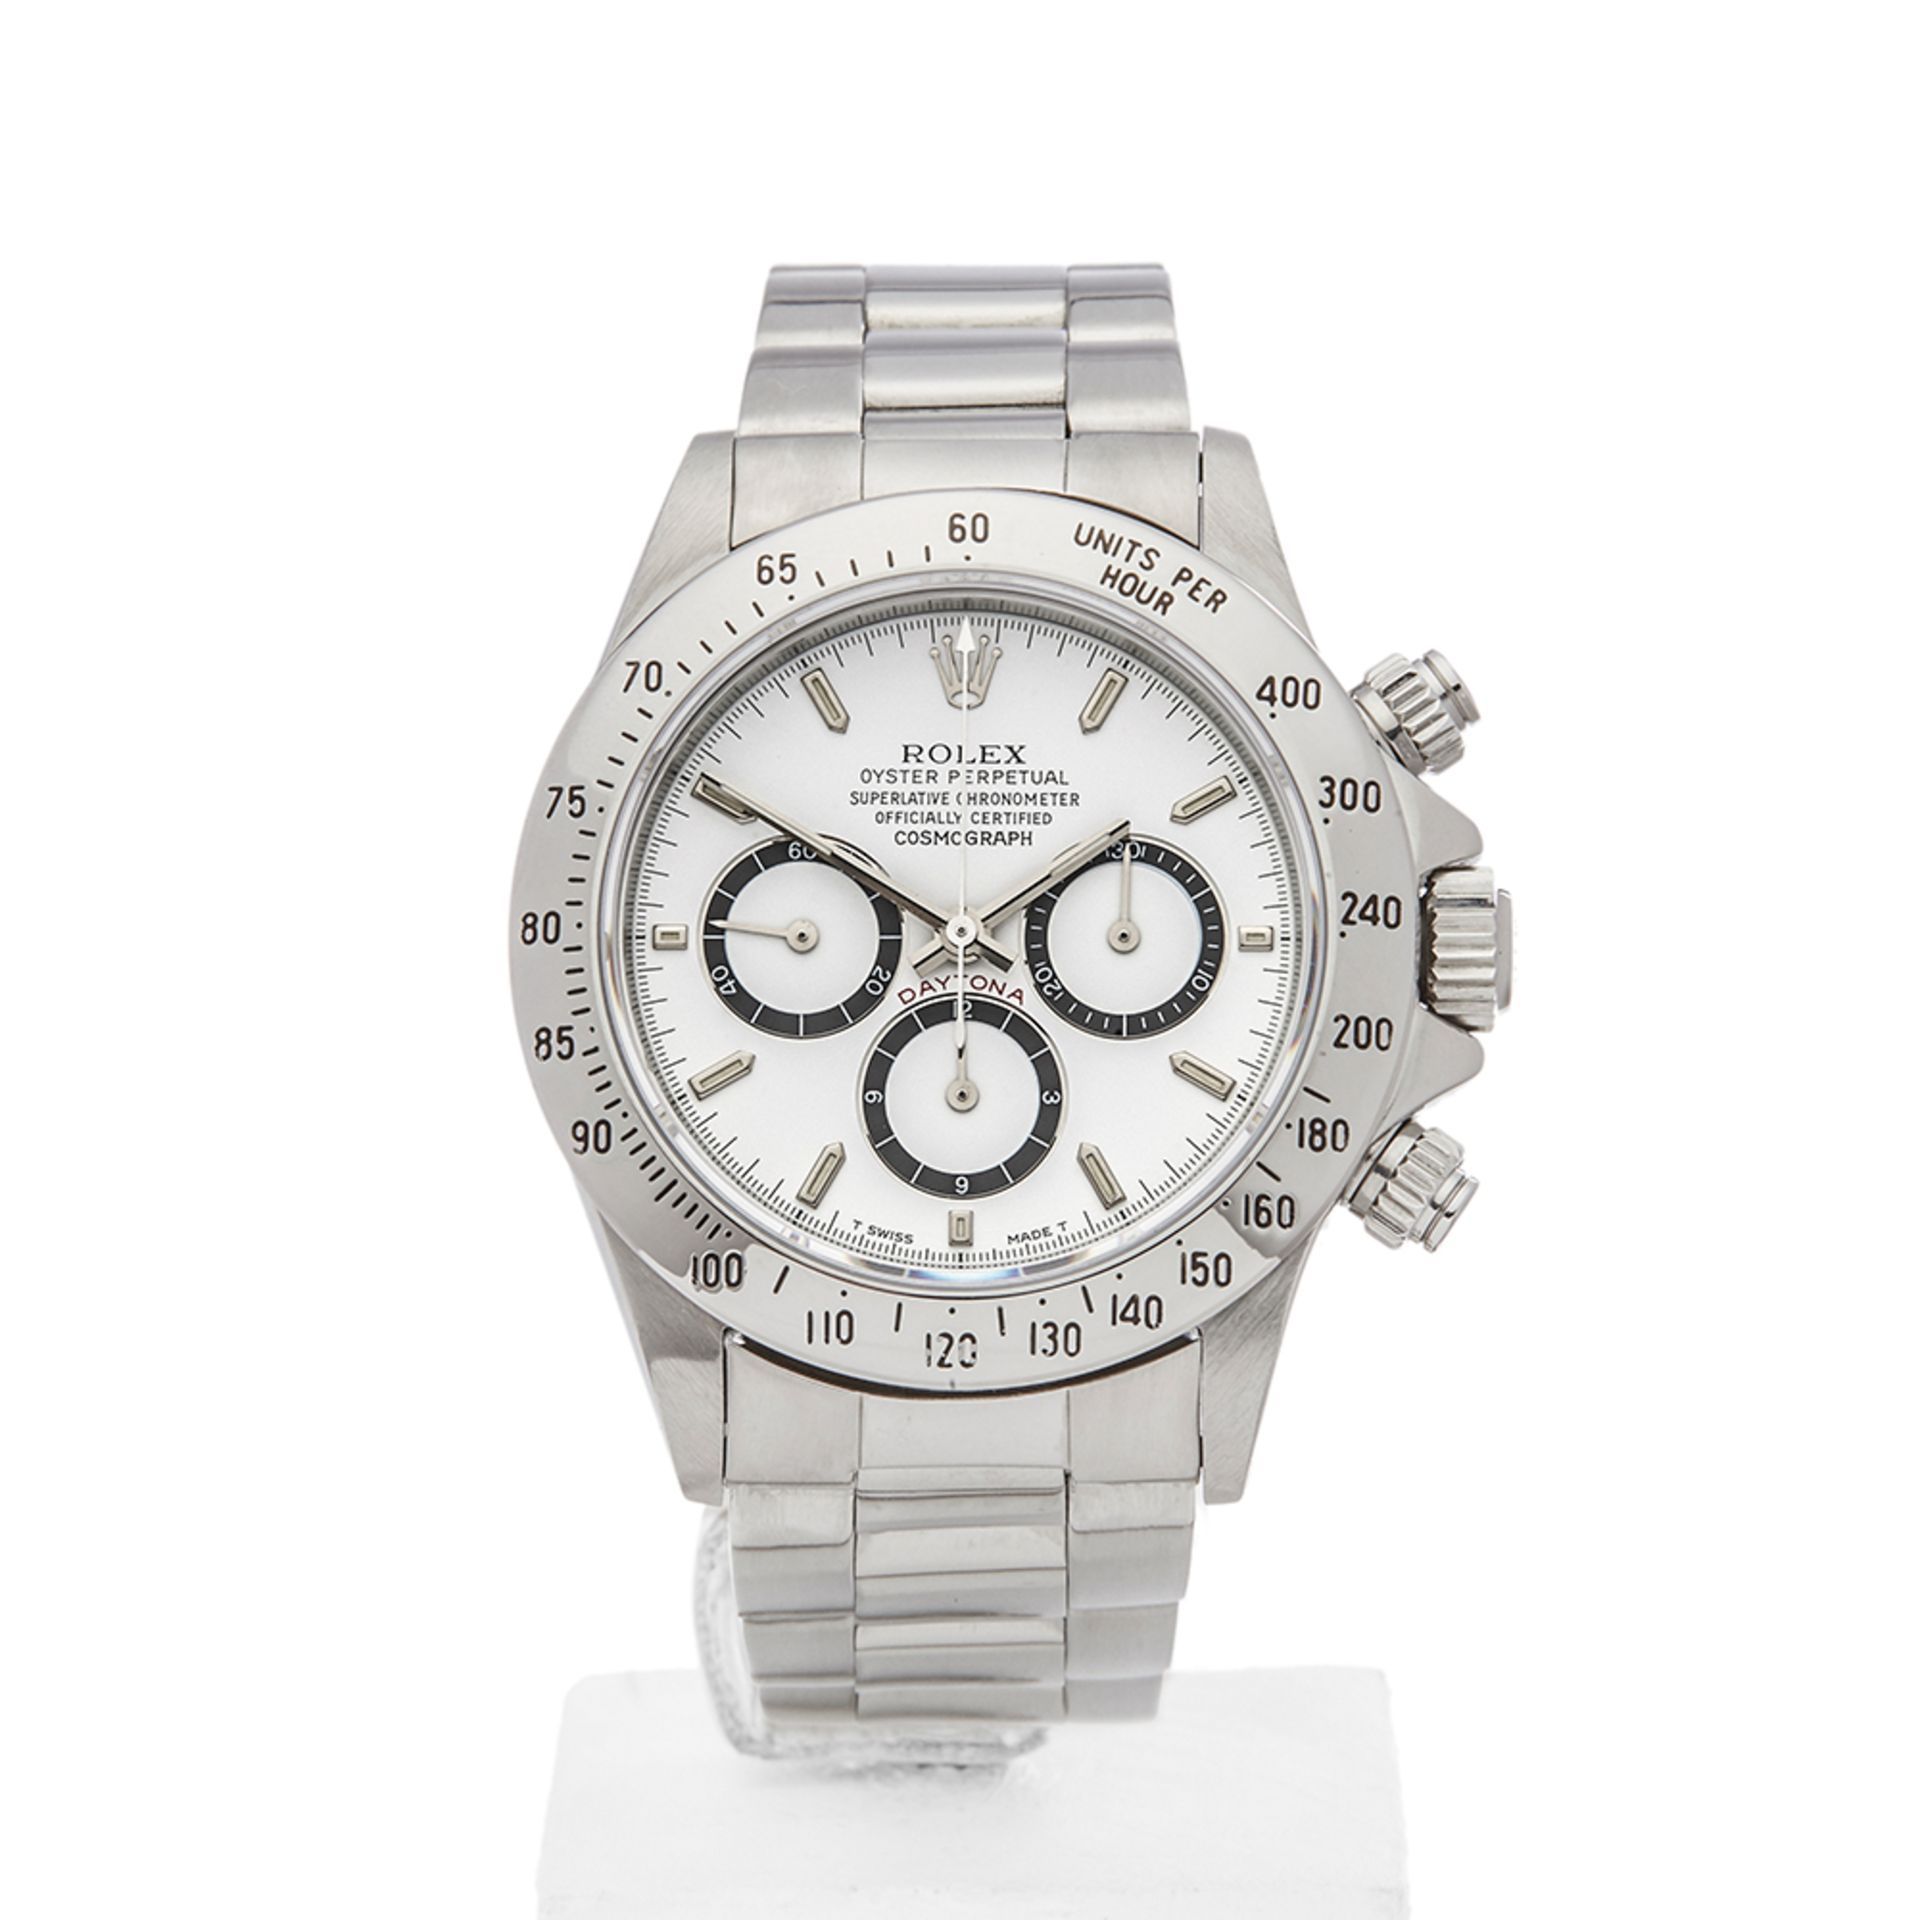 Rolex Daytona Inverted 6 Chronograph 40mm Stainless Steel - 16520 - Image 2 of 9